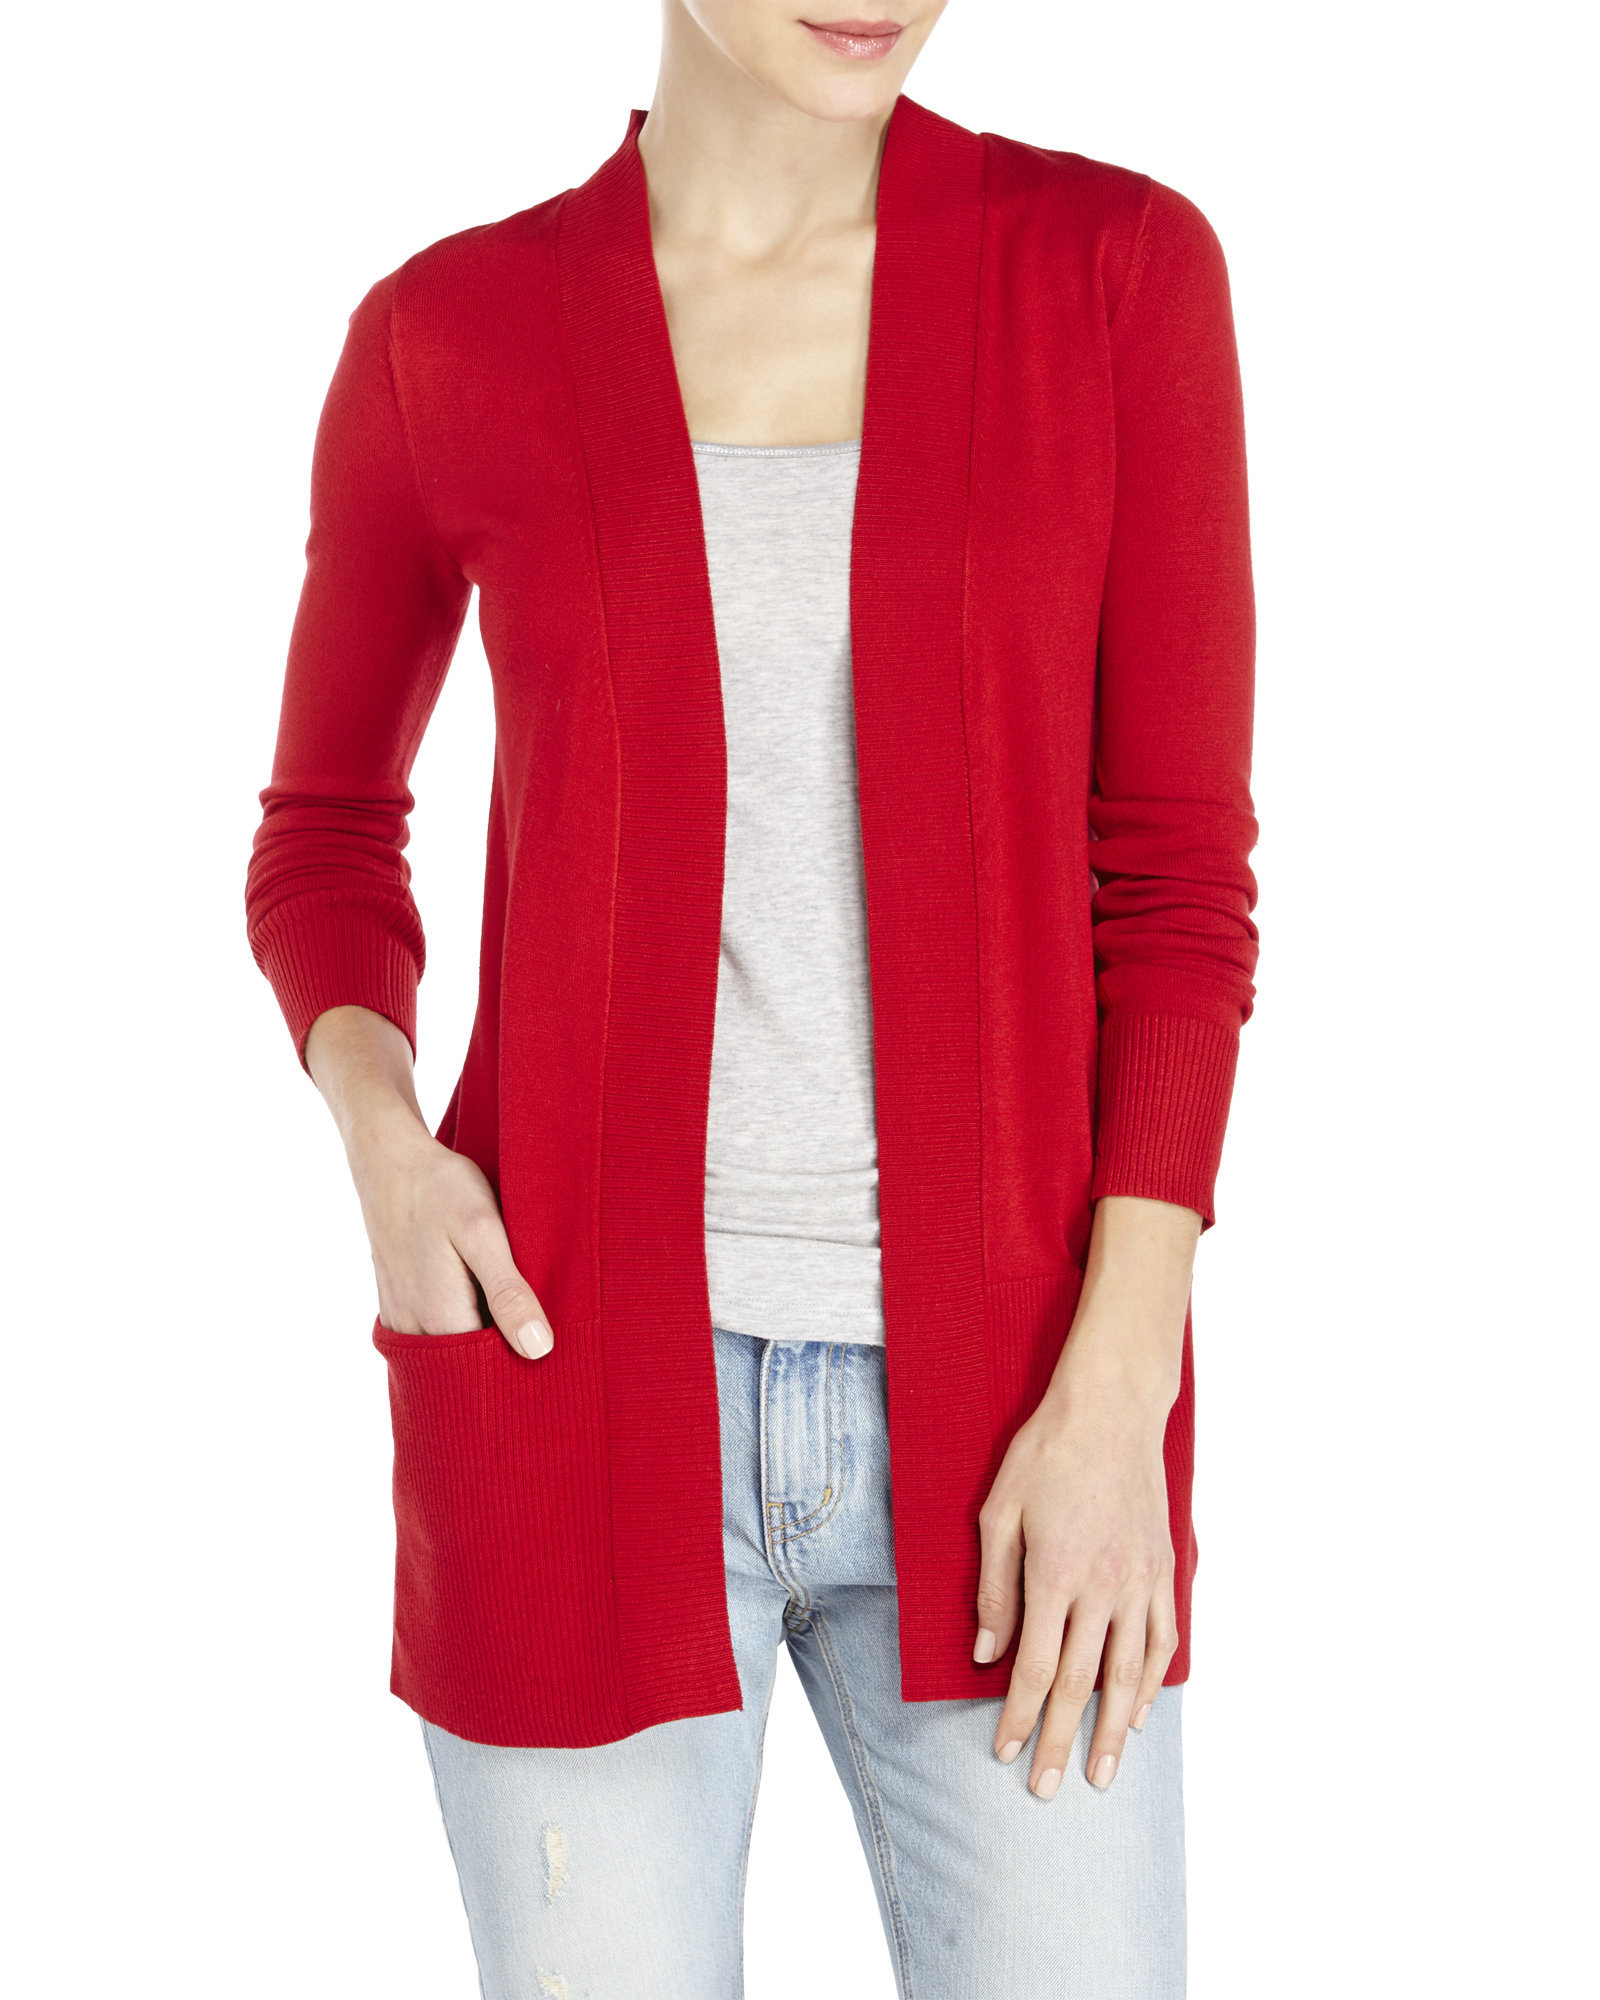 Premise studio Open-Front Knit Cardigan in Red | Lyst